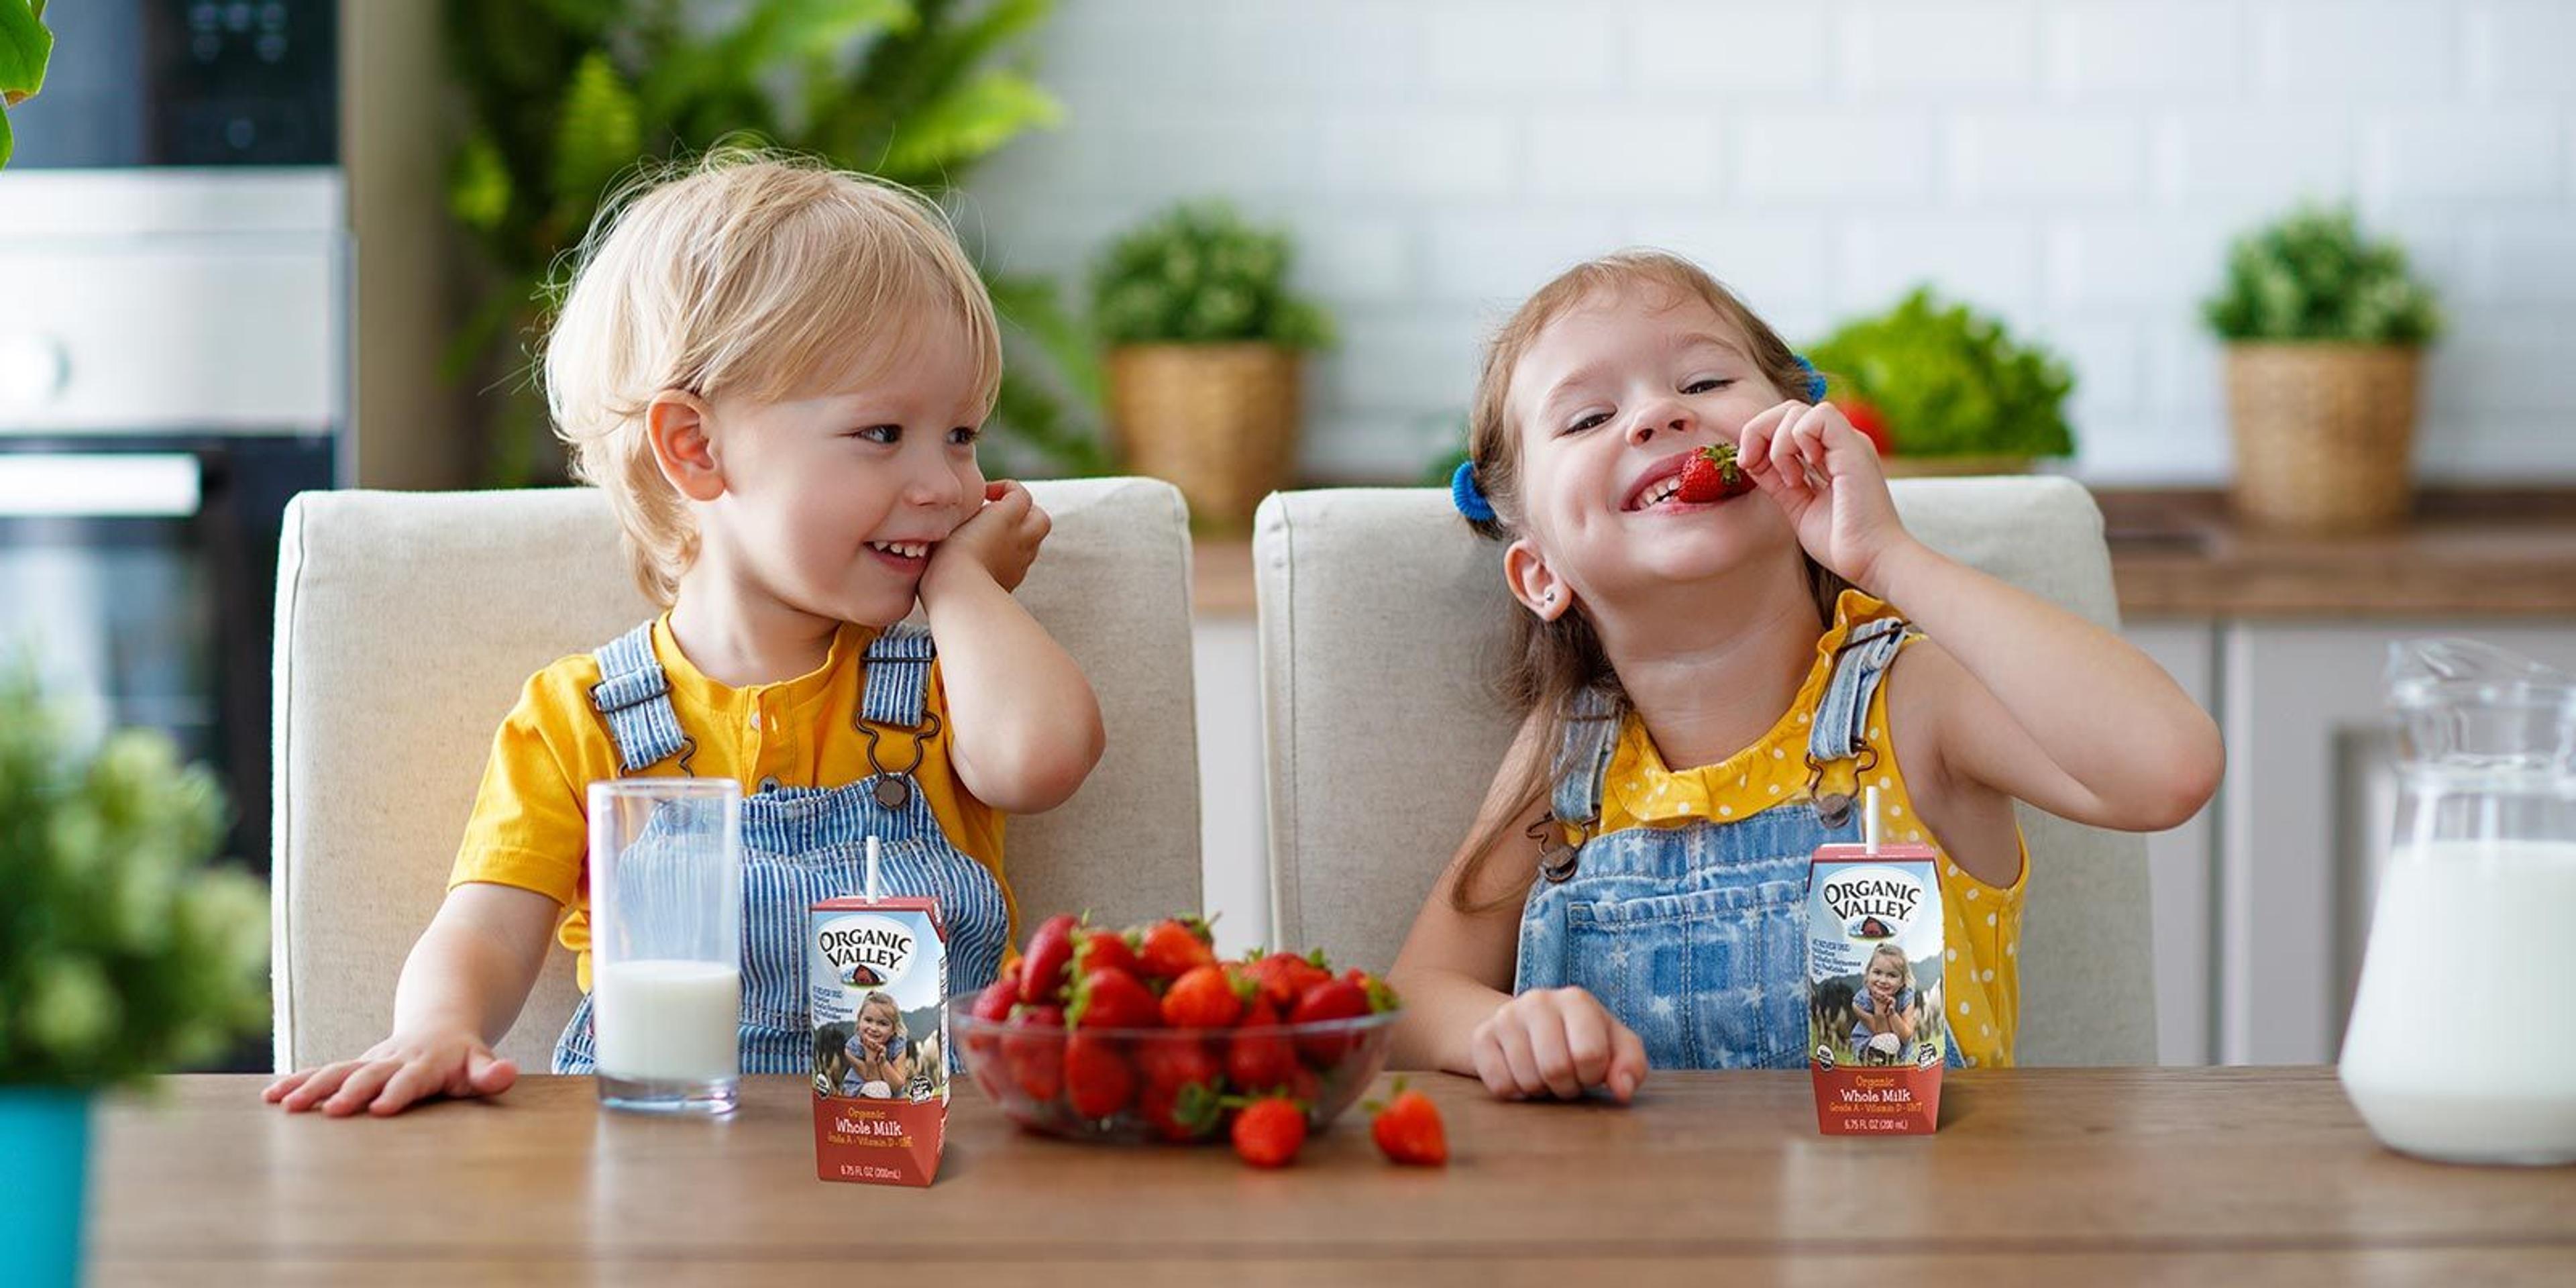 Children sitting down for a snack of Organic Valley single-serve milk and organic strawberries.